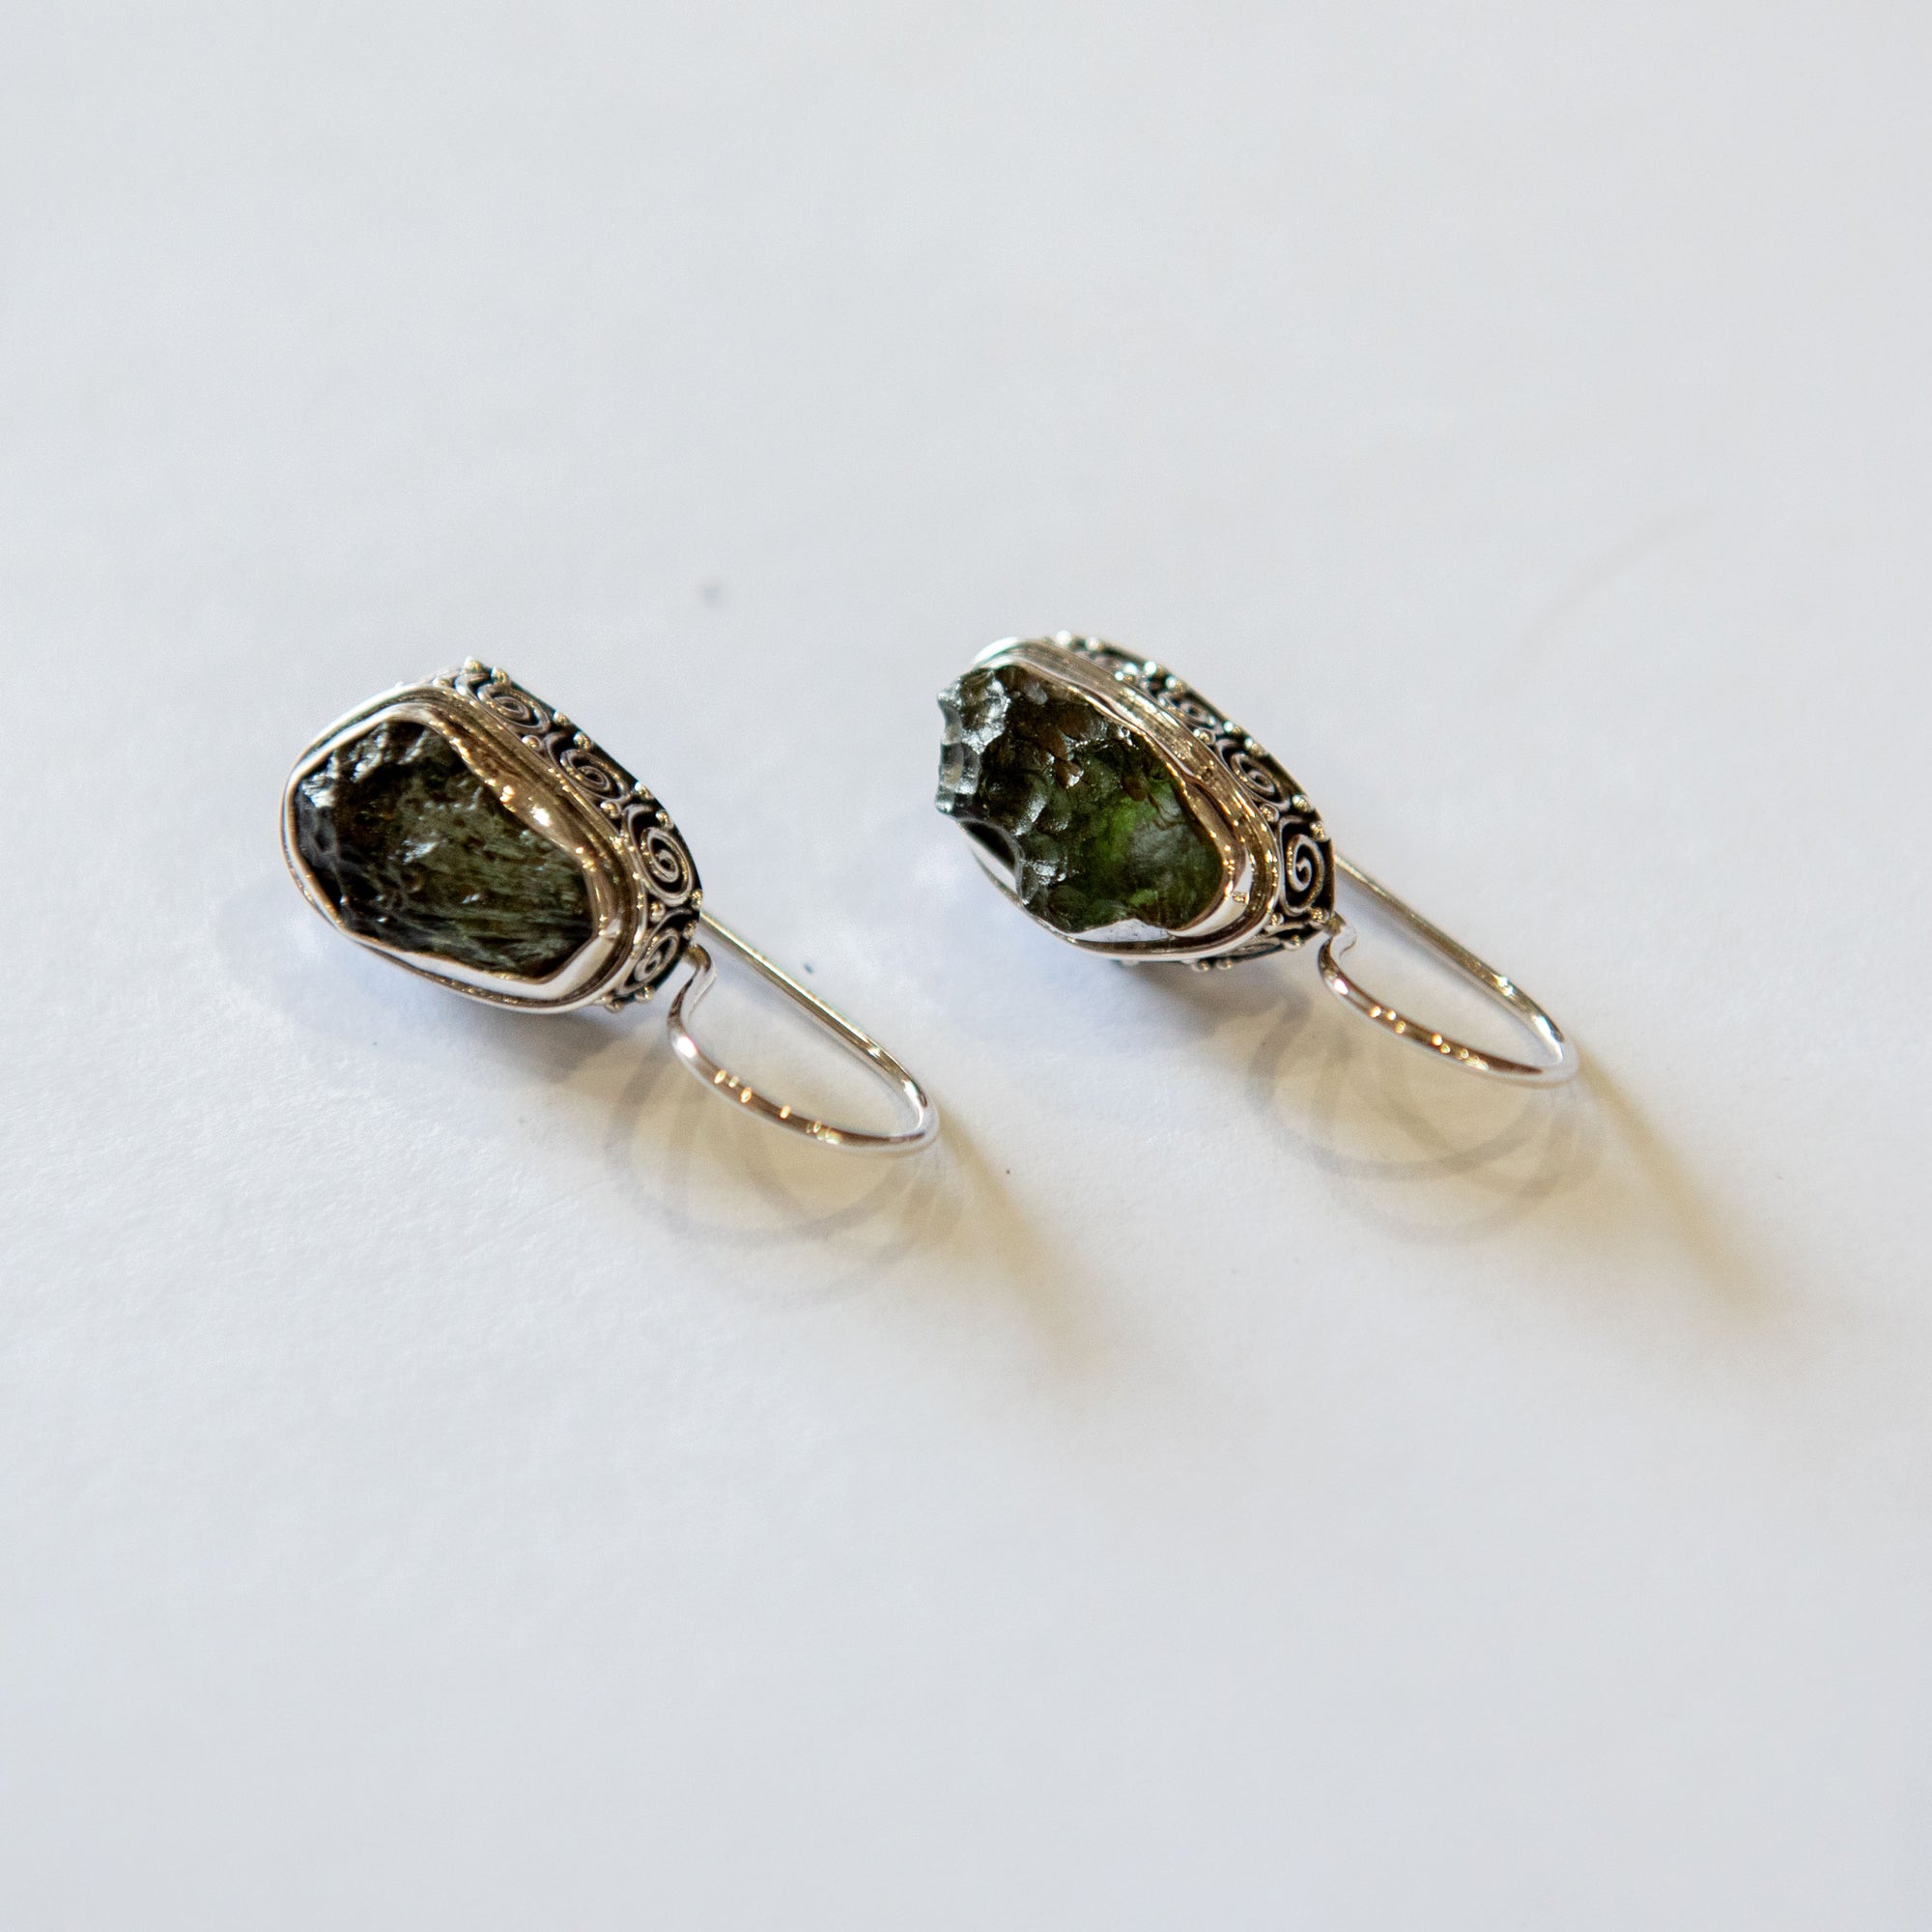 a pair of intricate, silver earrings with green stone on a white background